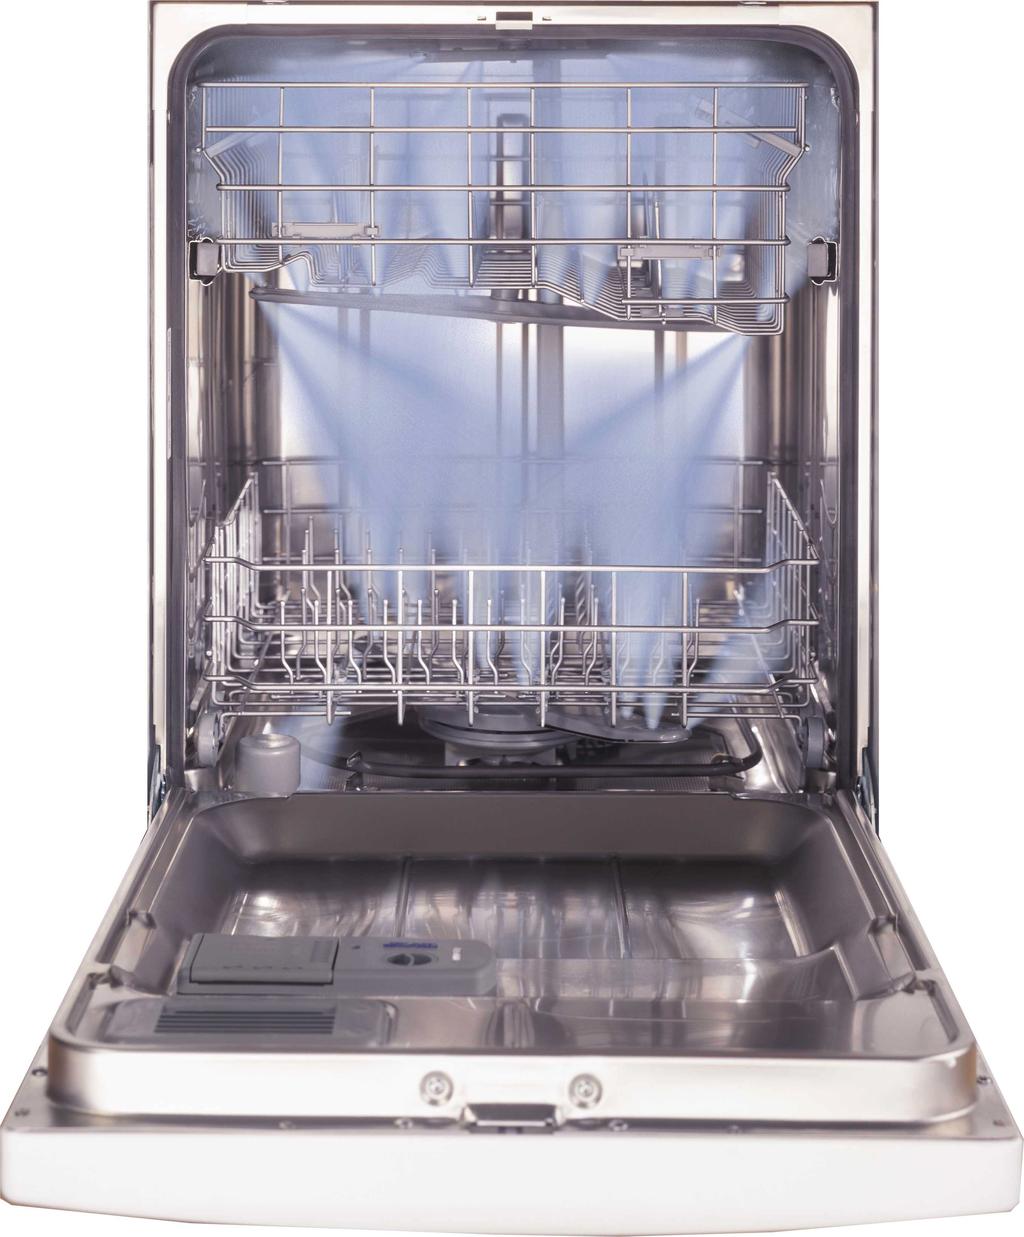 New GE Profile Stainless Dishwashers Six-level Action Adjustable Upper Rack Tall-Over-Tall Towerless Rack Design 5 6 Removable Upper Rack 4 StemSafe